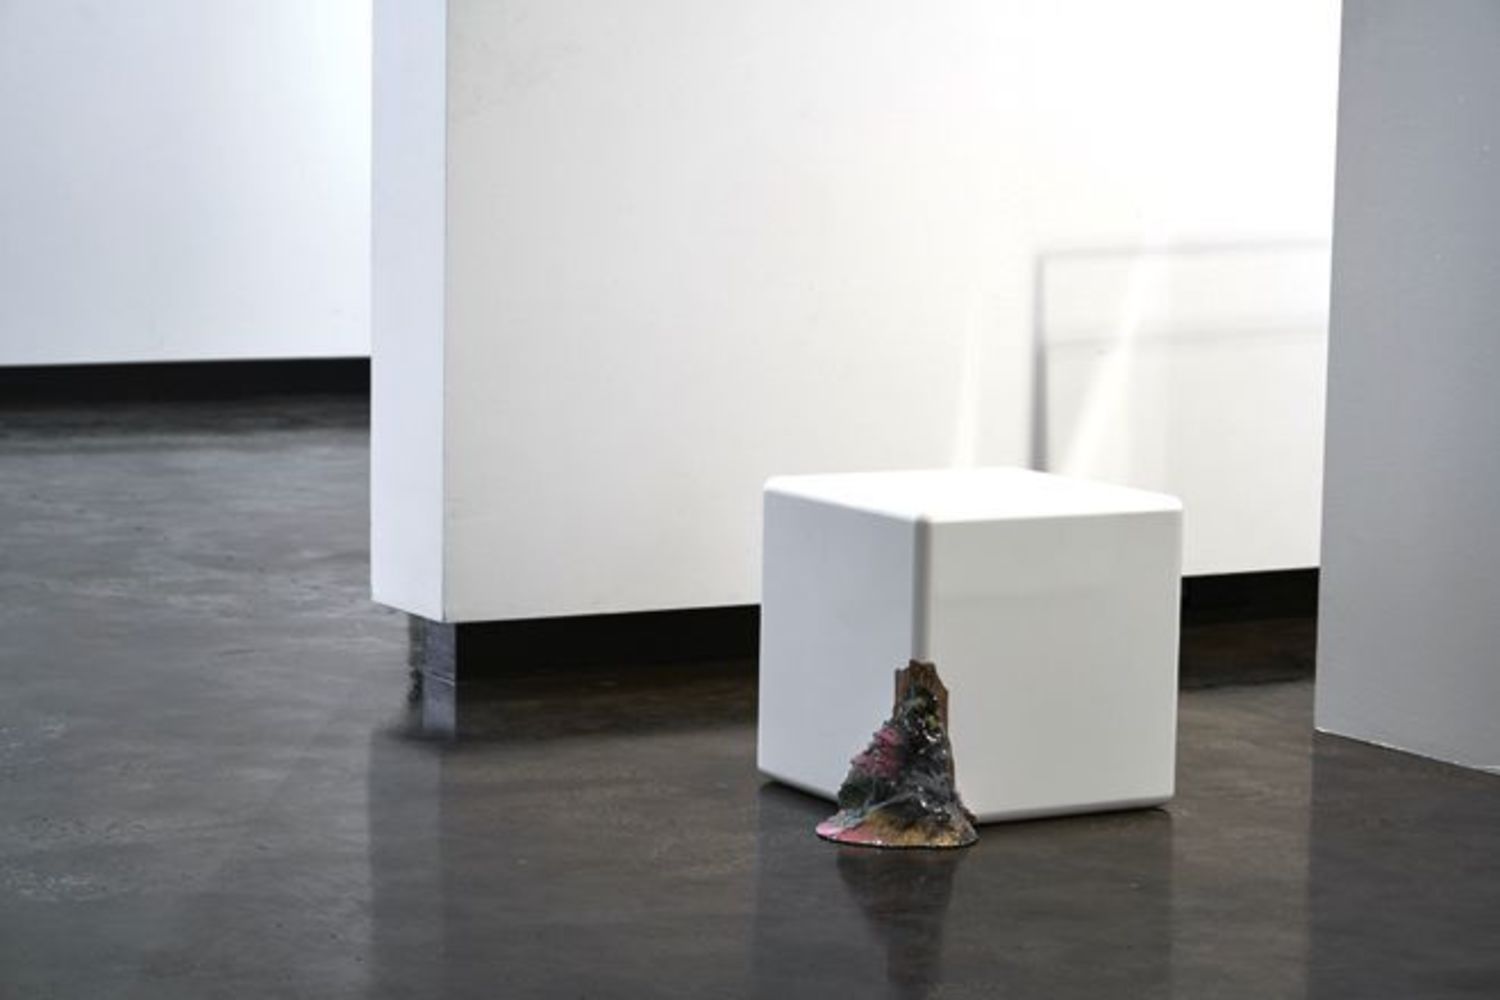 One white cube